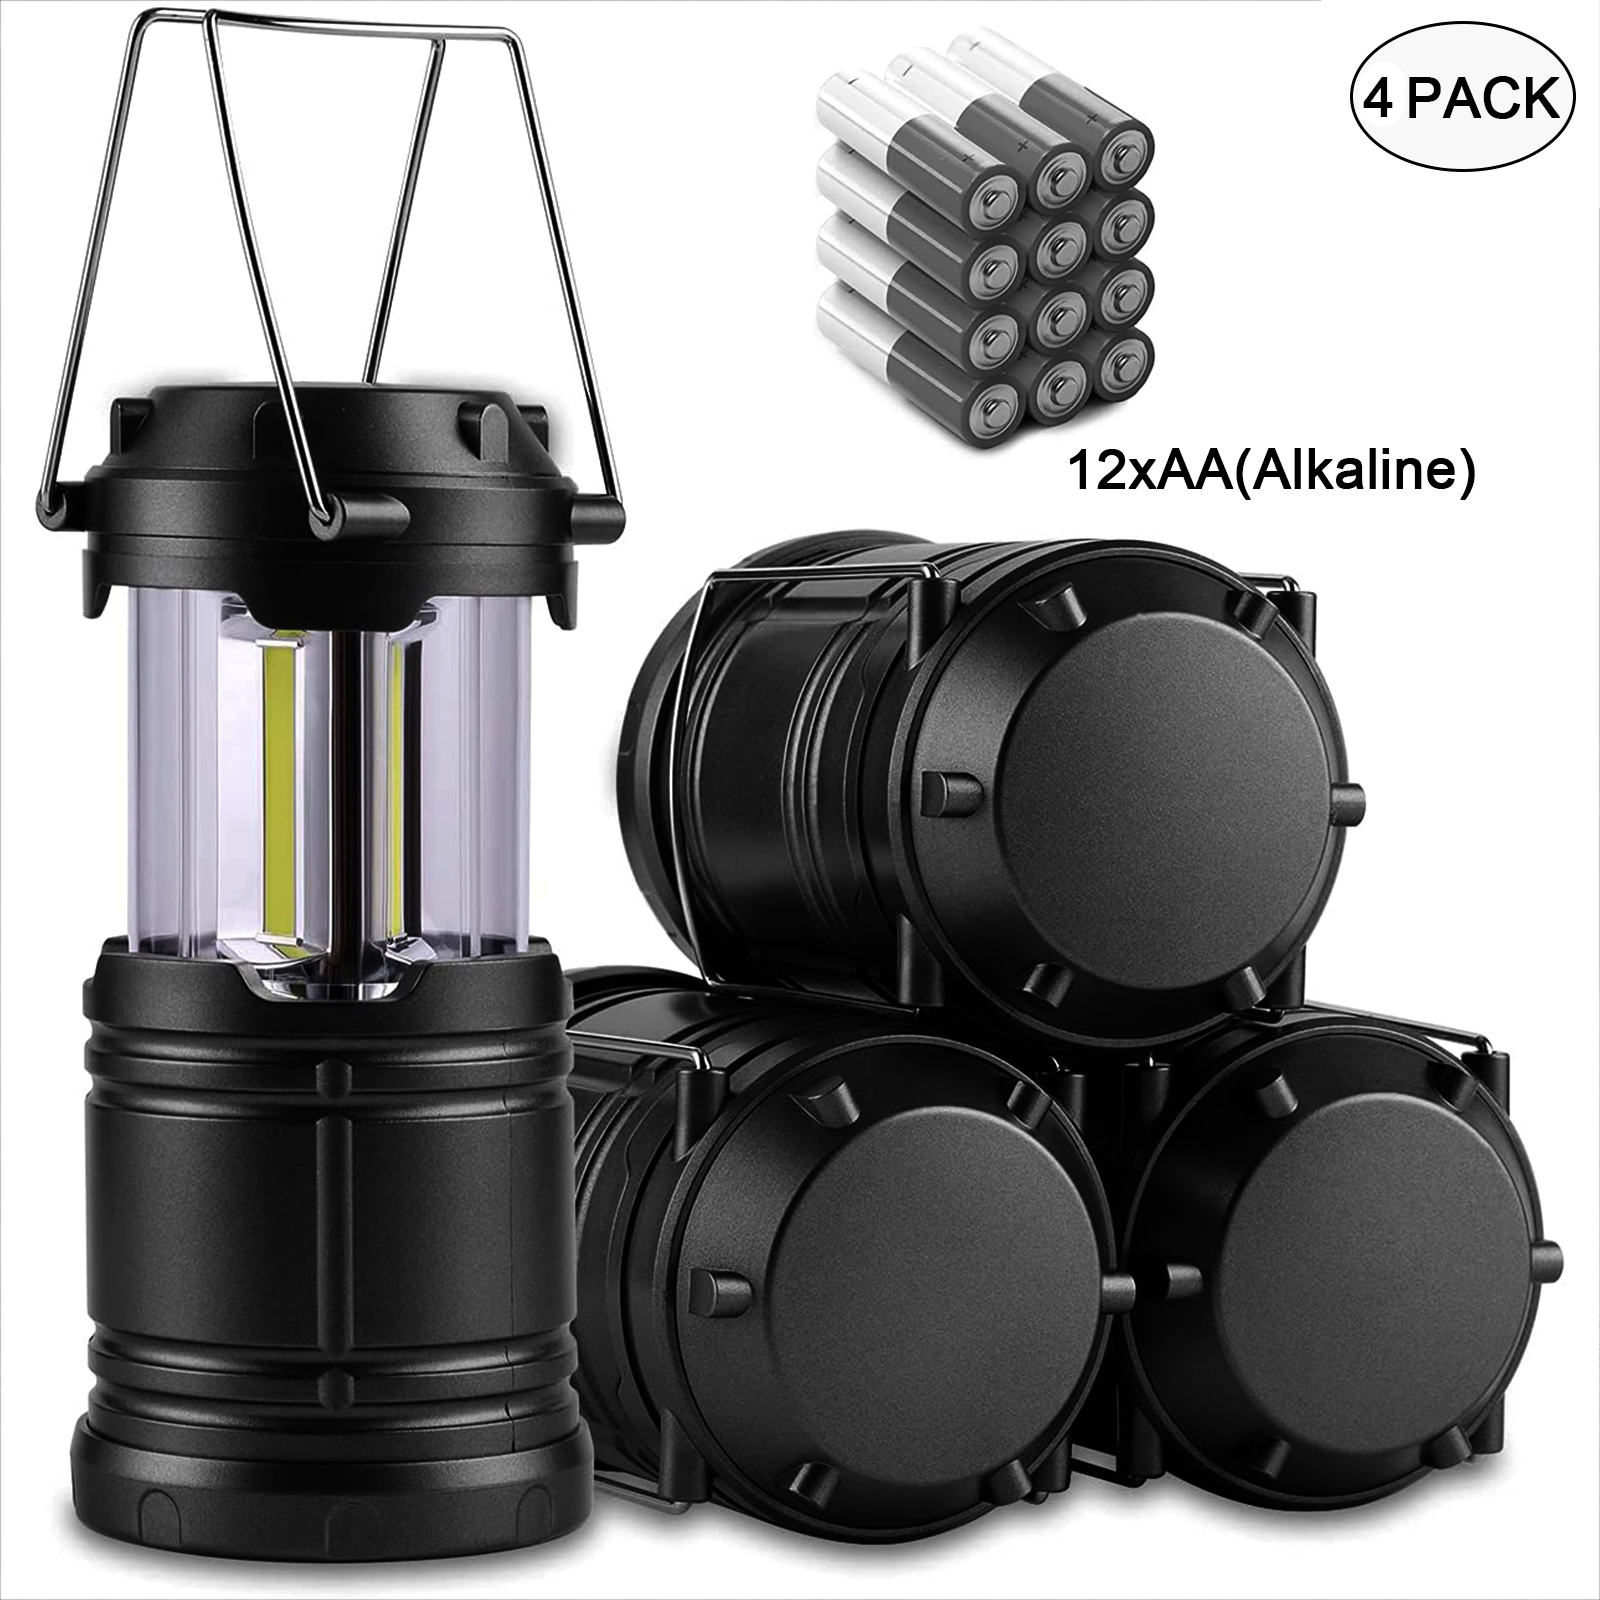 1/2/4 pack Super Bright LED Foldable Lantern - Waterproof and Portable  Handheld Lamp for Outdoor Camping and Emergencies